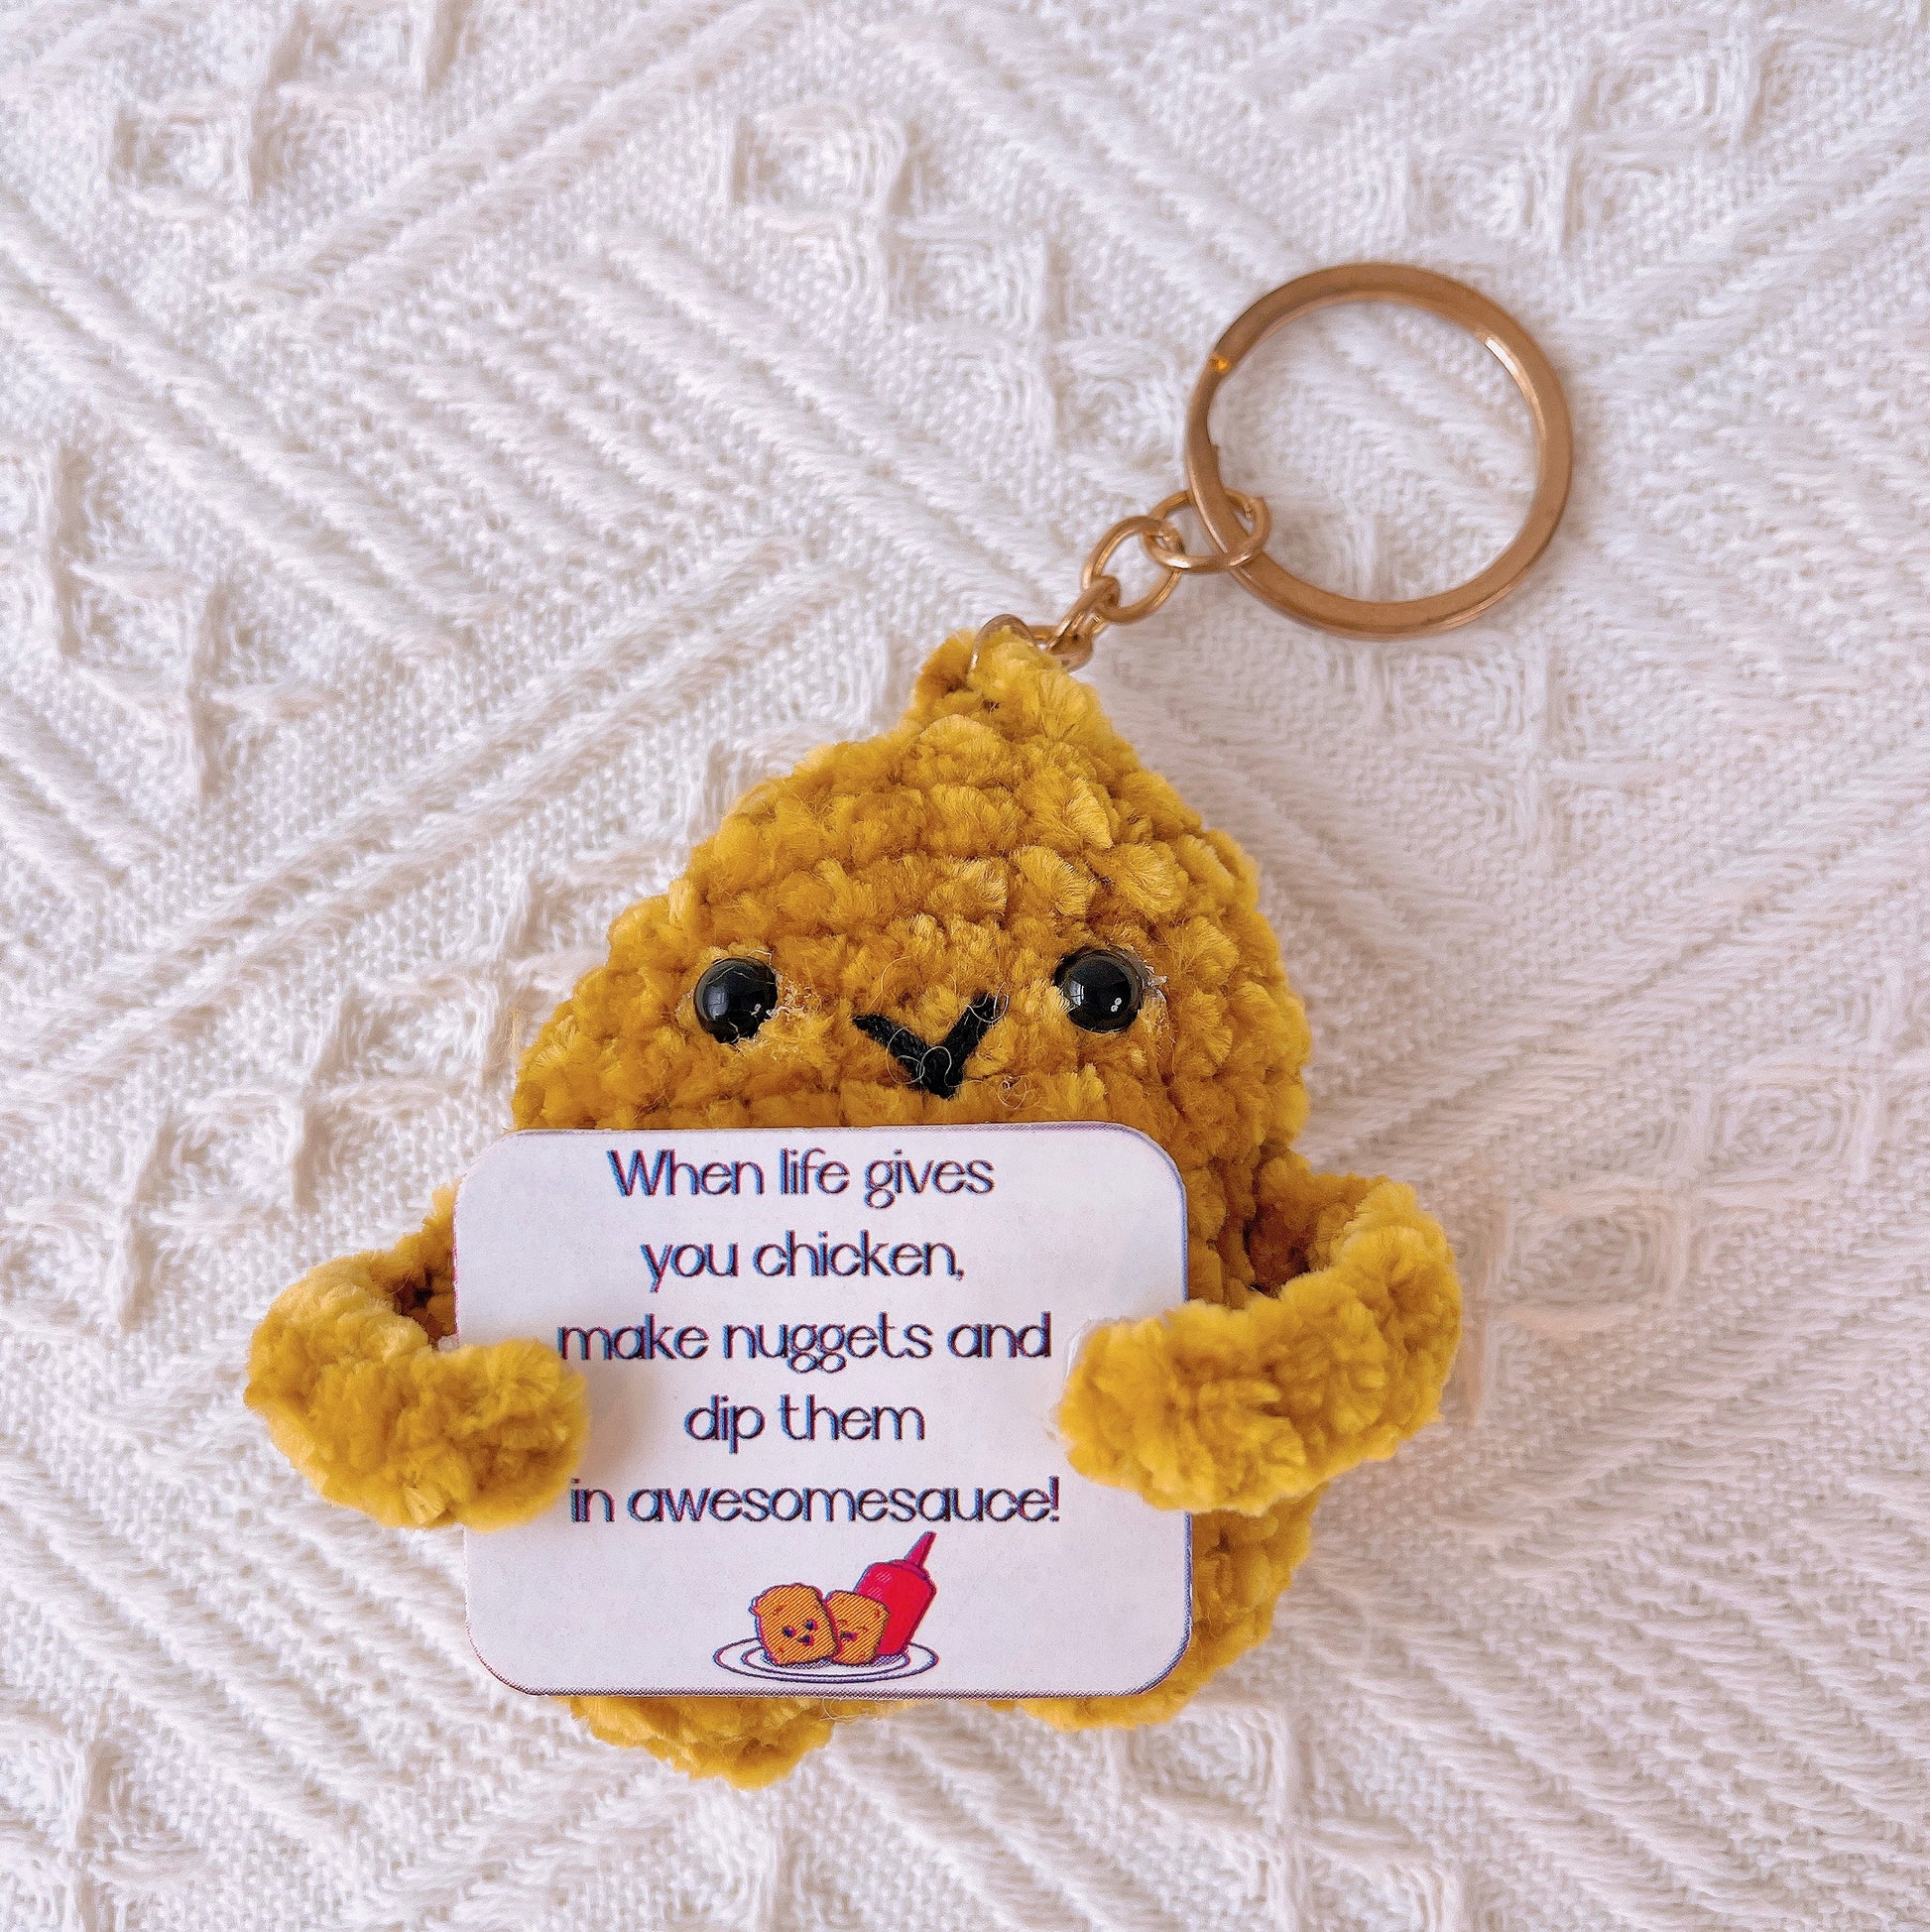 These emotional support nuggets are the cutest gift ever